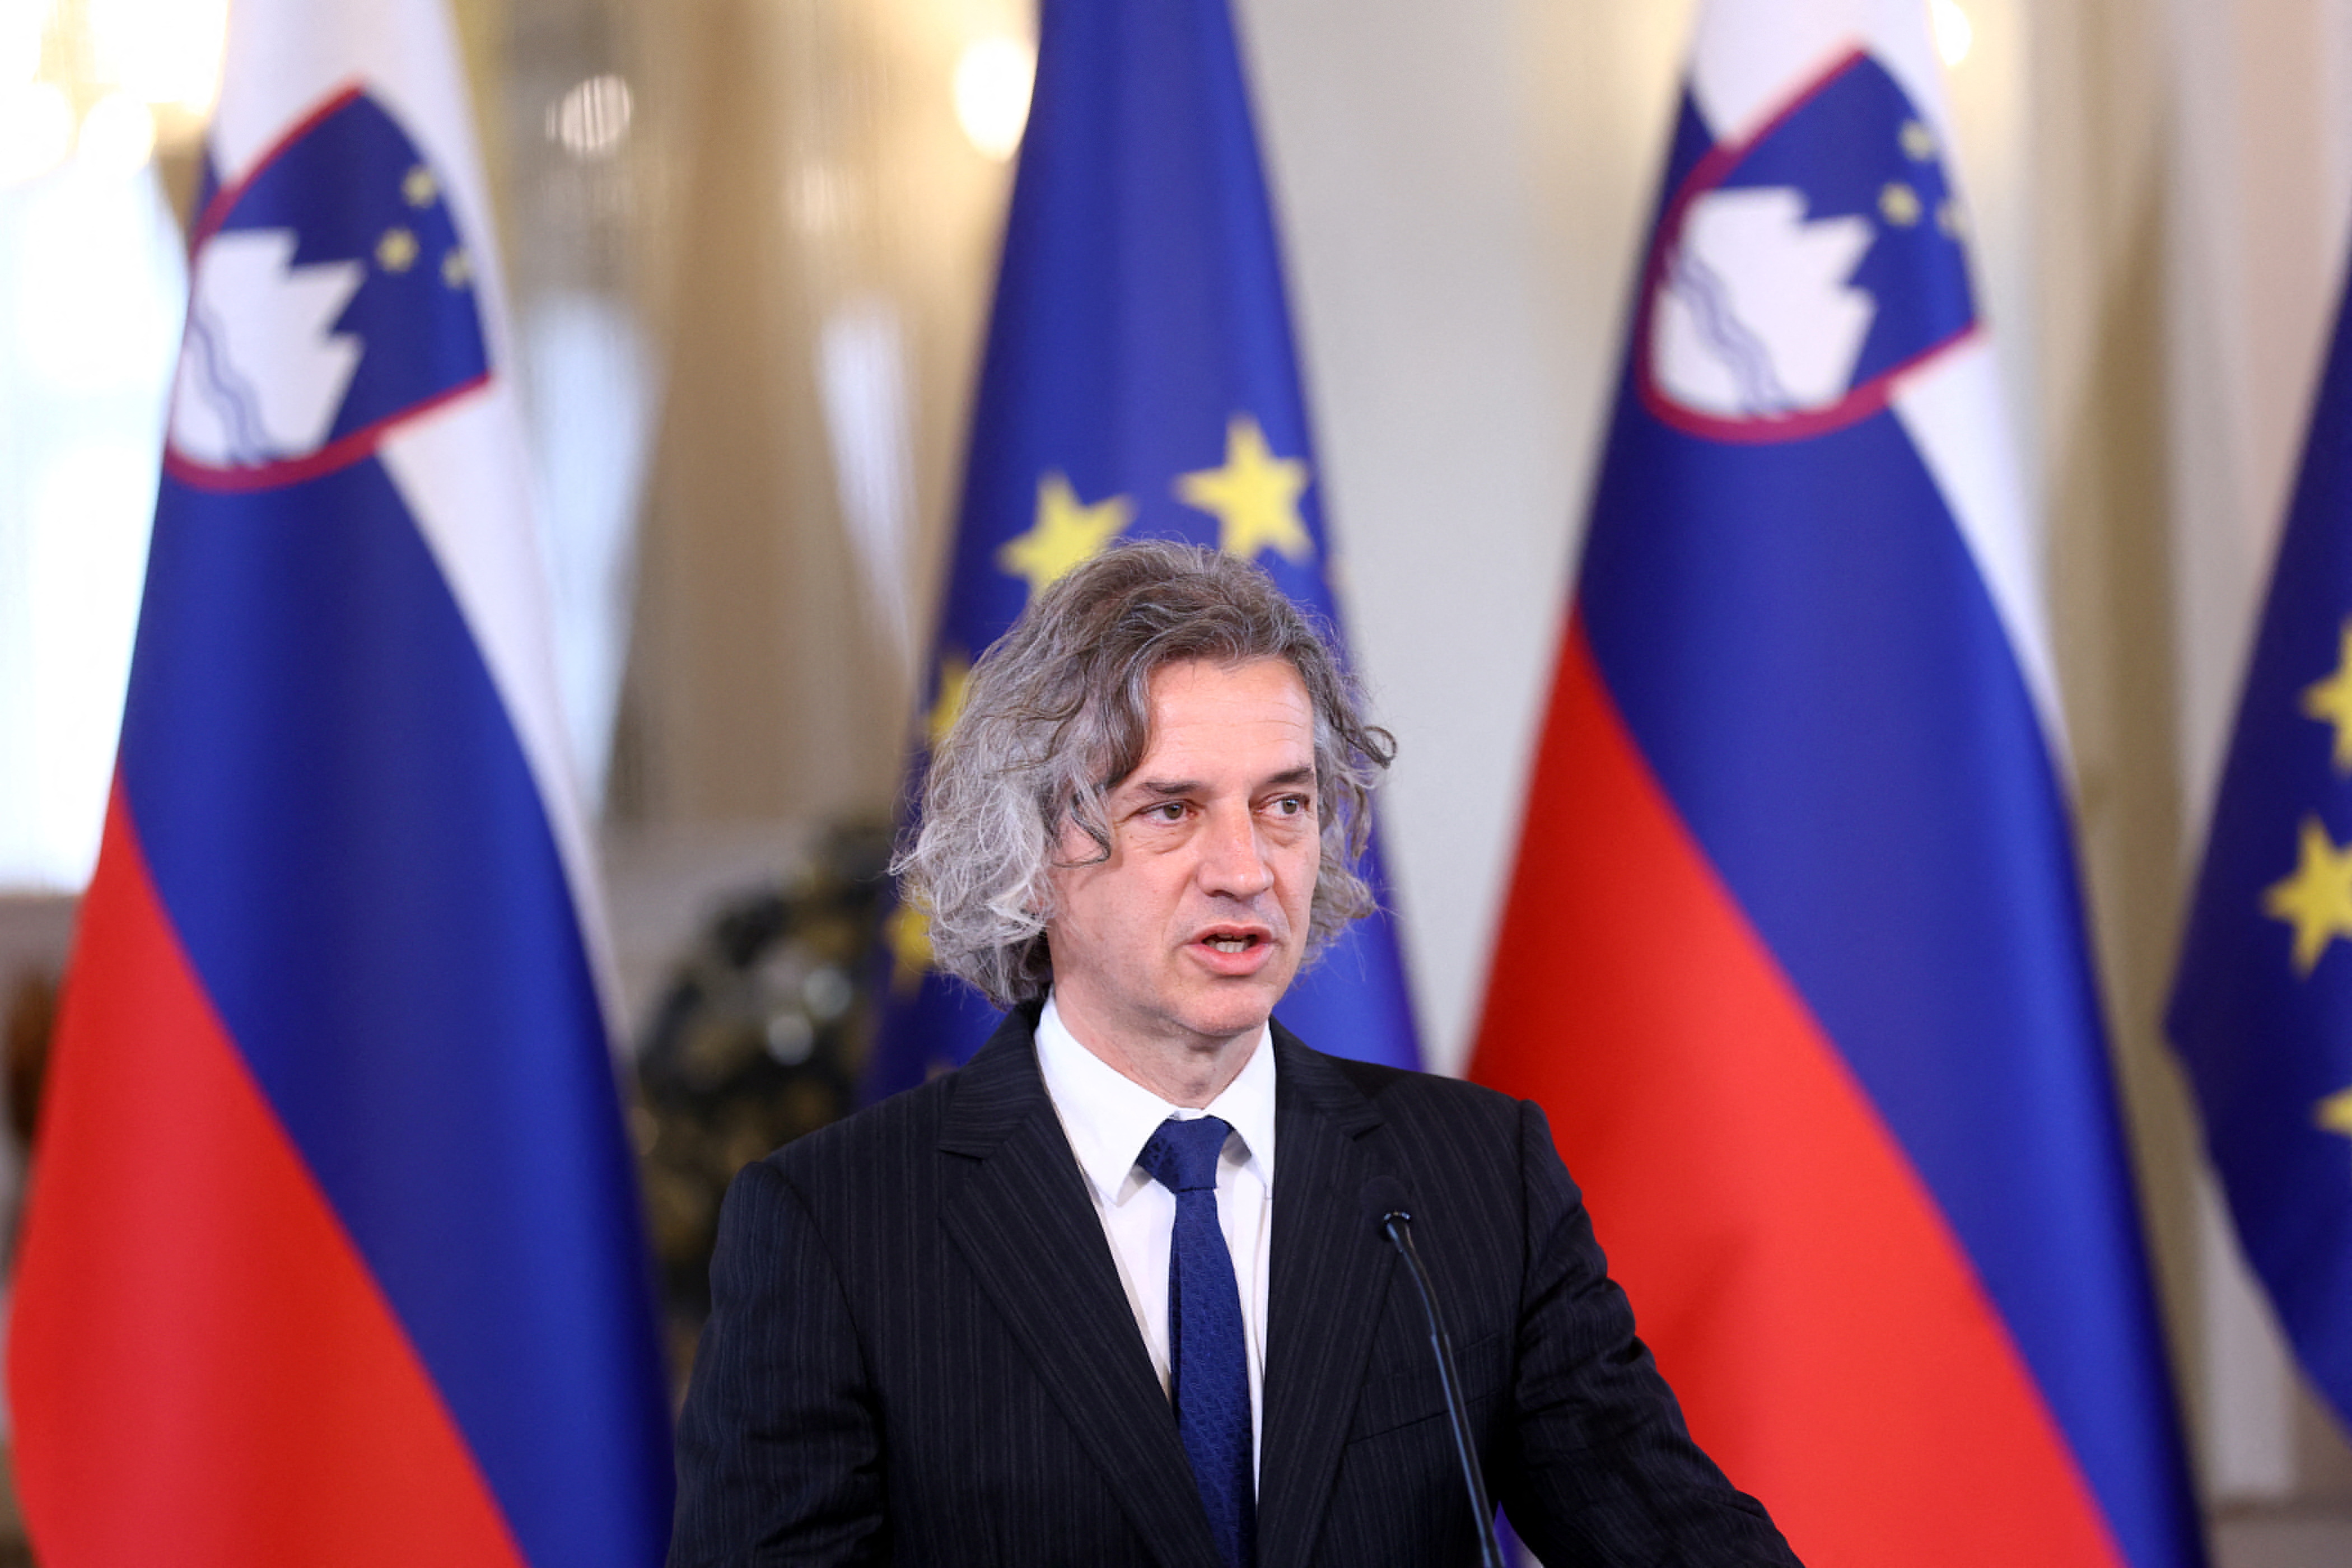 Winner of Parliamentary elections Robert Golob addresses a news conference after an informal meeting with Slovenia's President Borut Pahor in Ljubljana